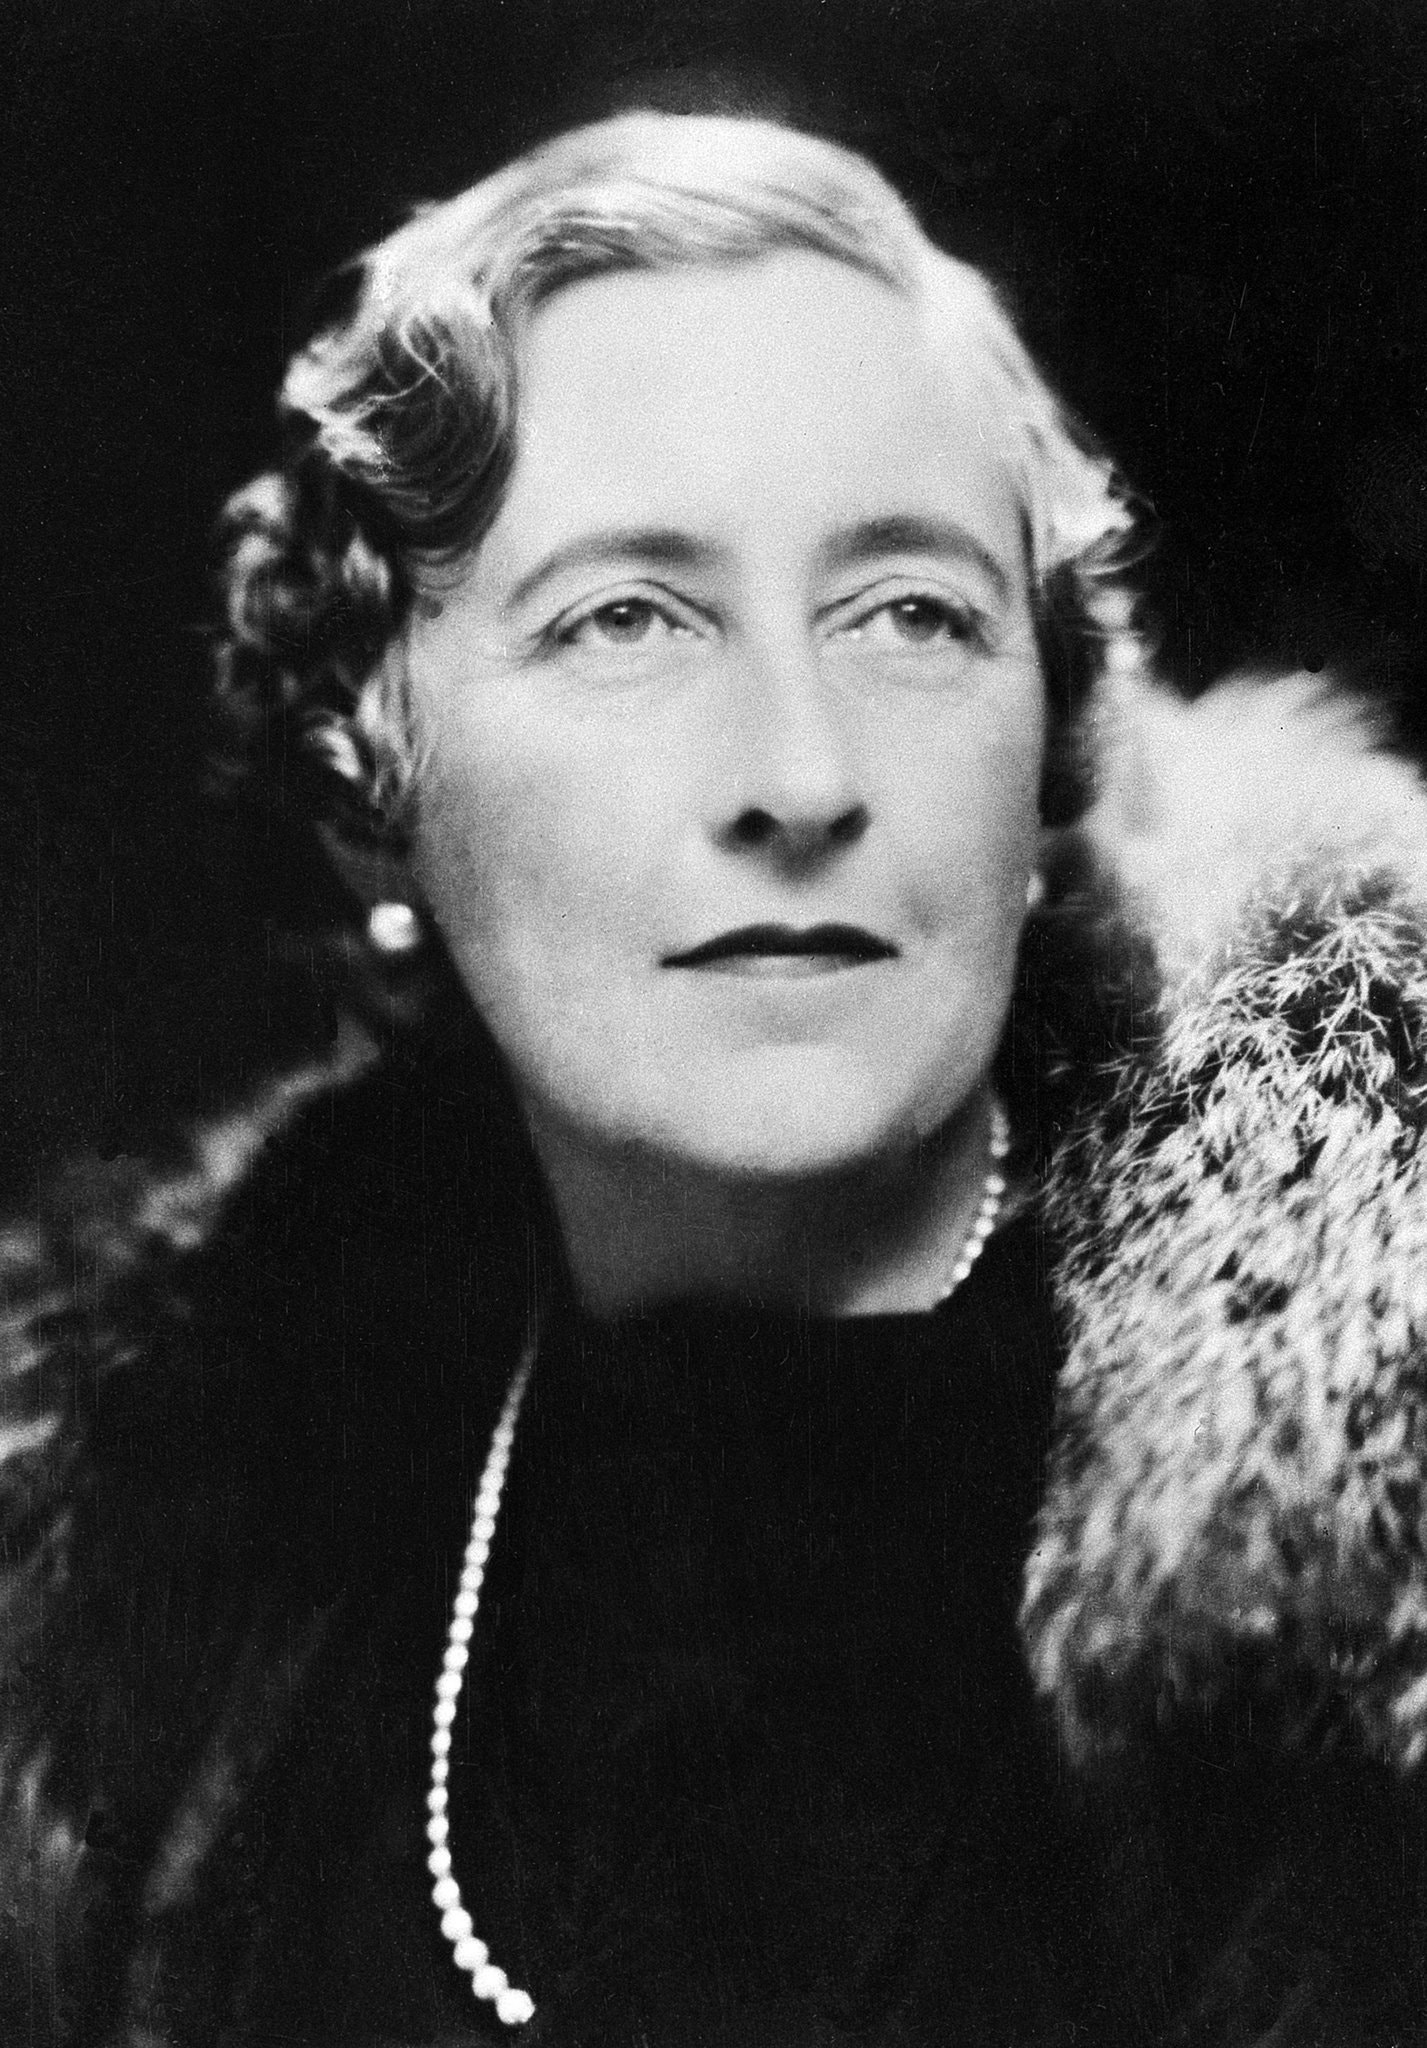 Looking at Agatha Christie and feminism